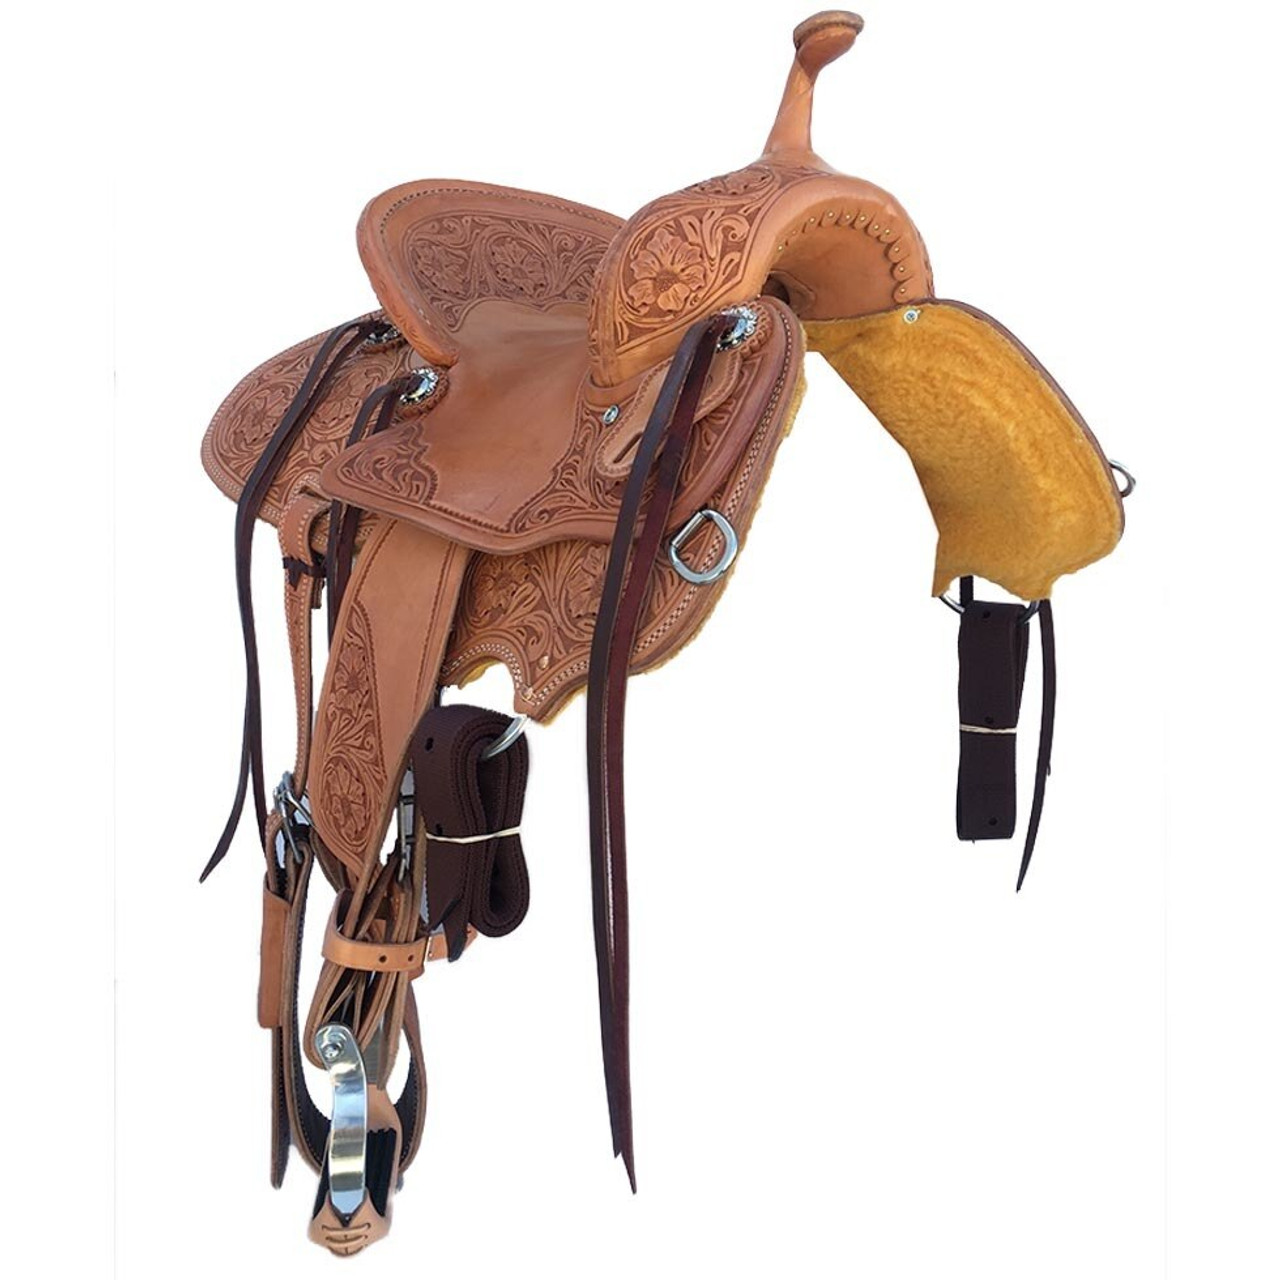 New Stock Saddle in Hermann Oak leather by Fort Worth Saddle Co with 13 inch seat. Light oil slick seat with all floral tooling and floral embellished pencil roll cantle. Gullet size is 7 inch, weight is 27lbs, and skirt is 25 inch. Made in USA. Limited lifetime warranty.

S978